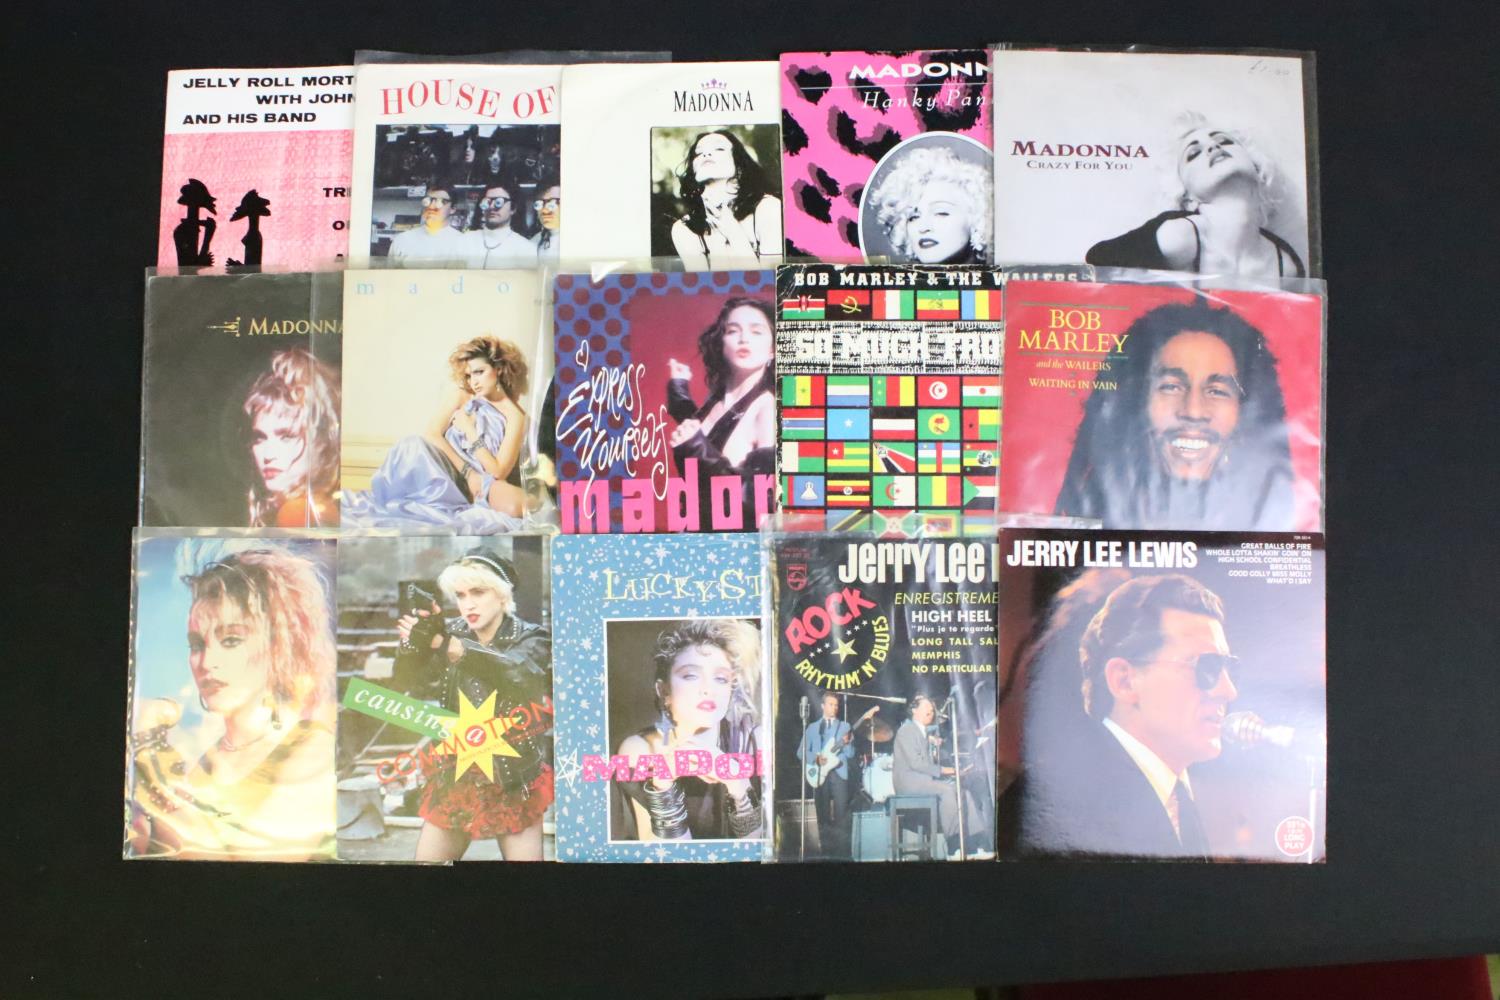 Vinyl - Approx 200 7" singles to include Madonna, The Mods (RCA), Jerry Lee Lewis, Bob Marley & - Image 5 of 7